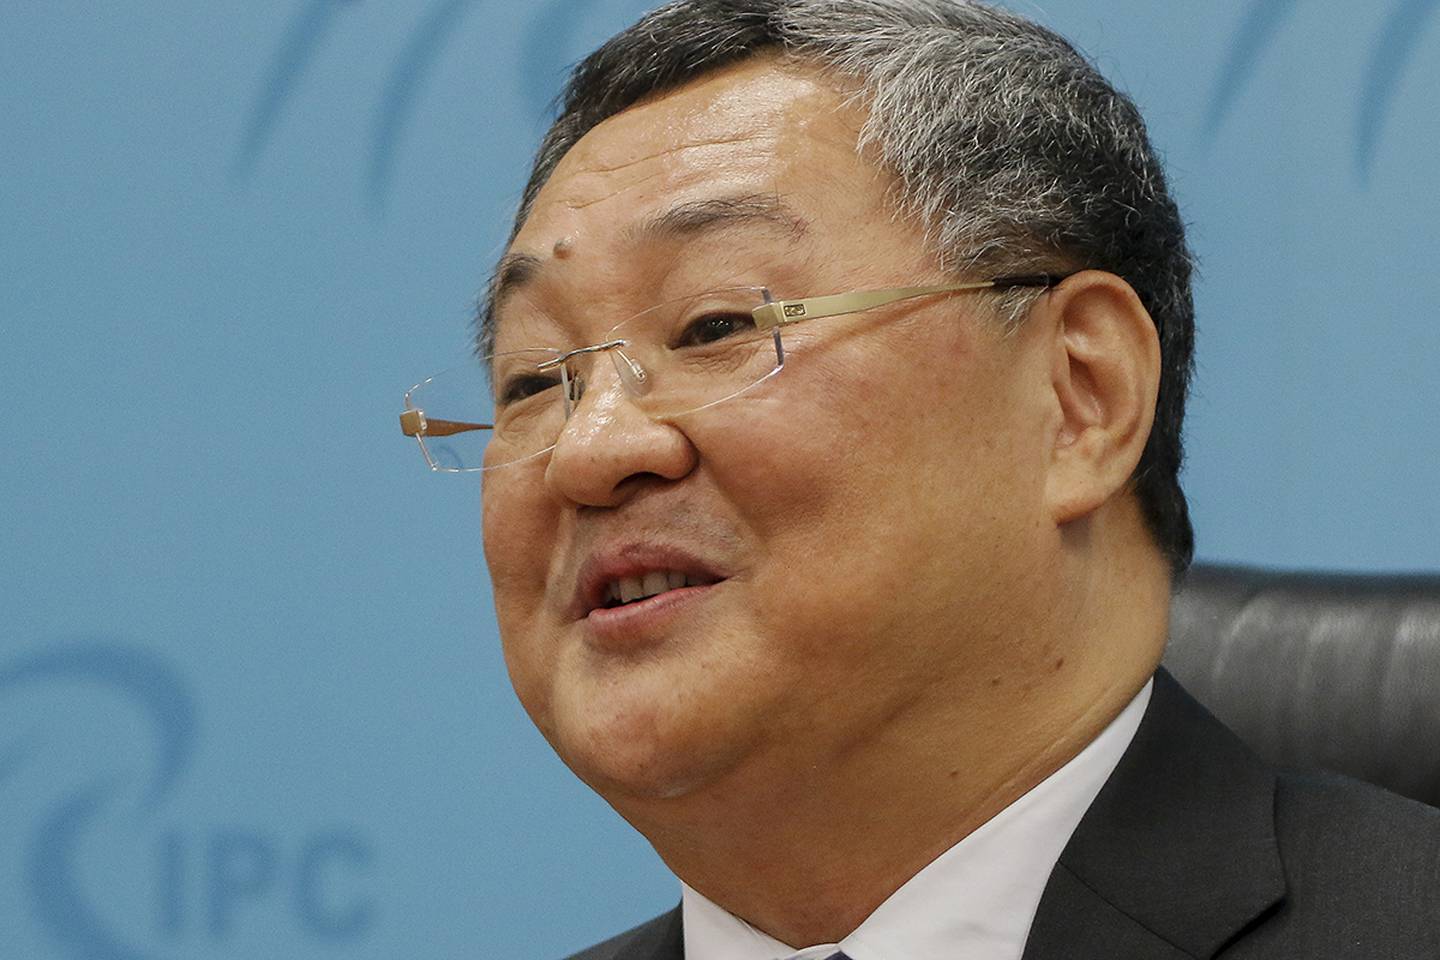 Director of the foreign ministry's Arms Control Department, Fu Cong speaks during a press conference at the Ministry of Foreign Affair building in Beijing, Tuesday, Aug. 6, 2019.